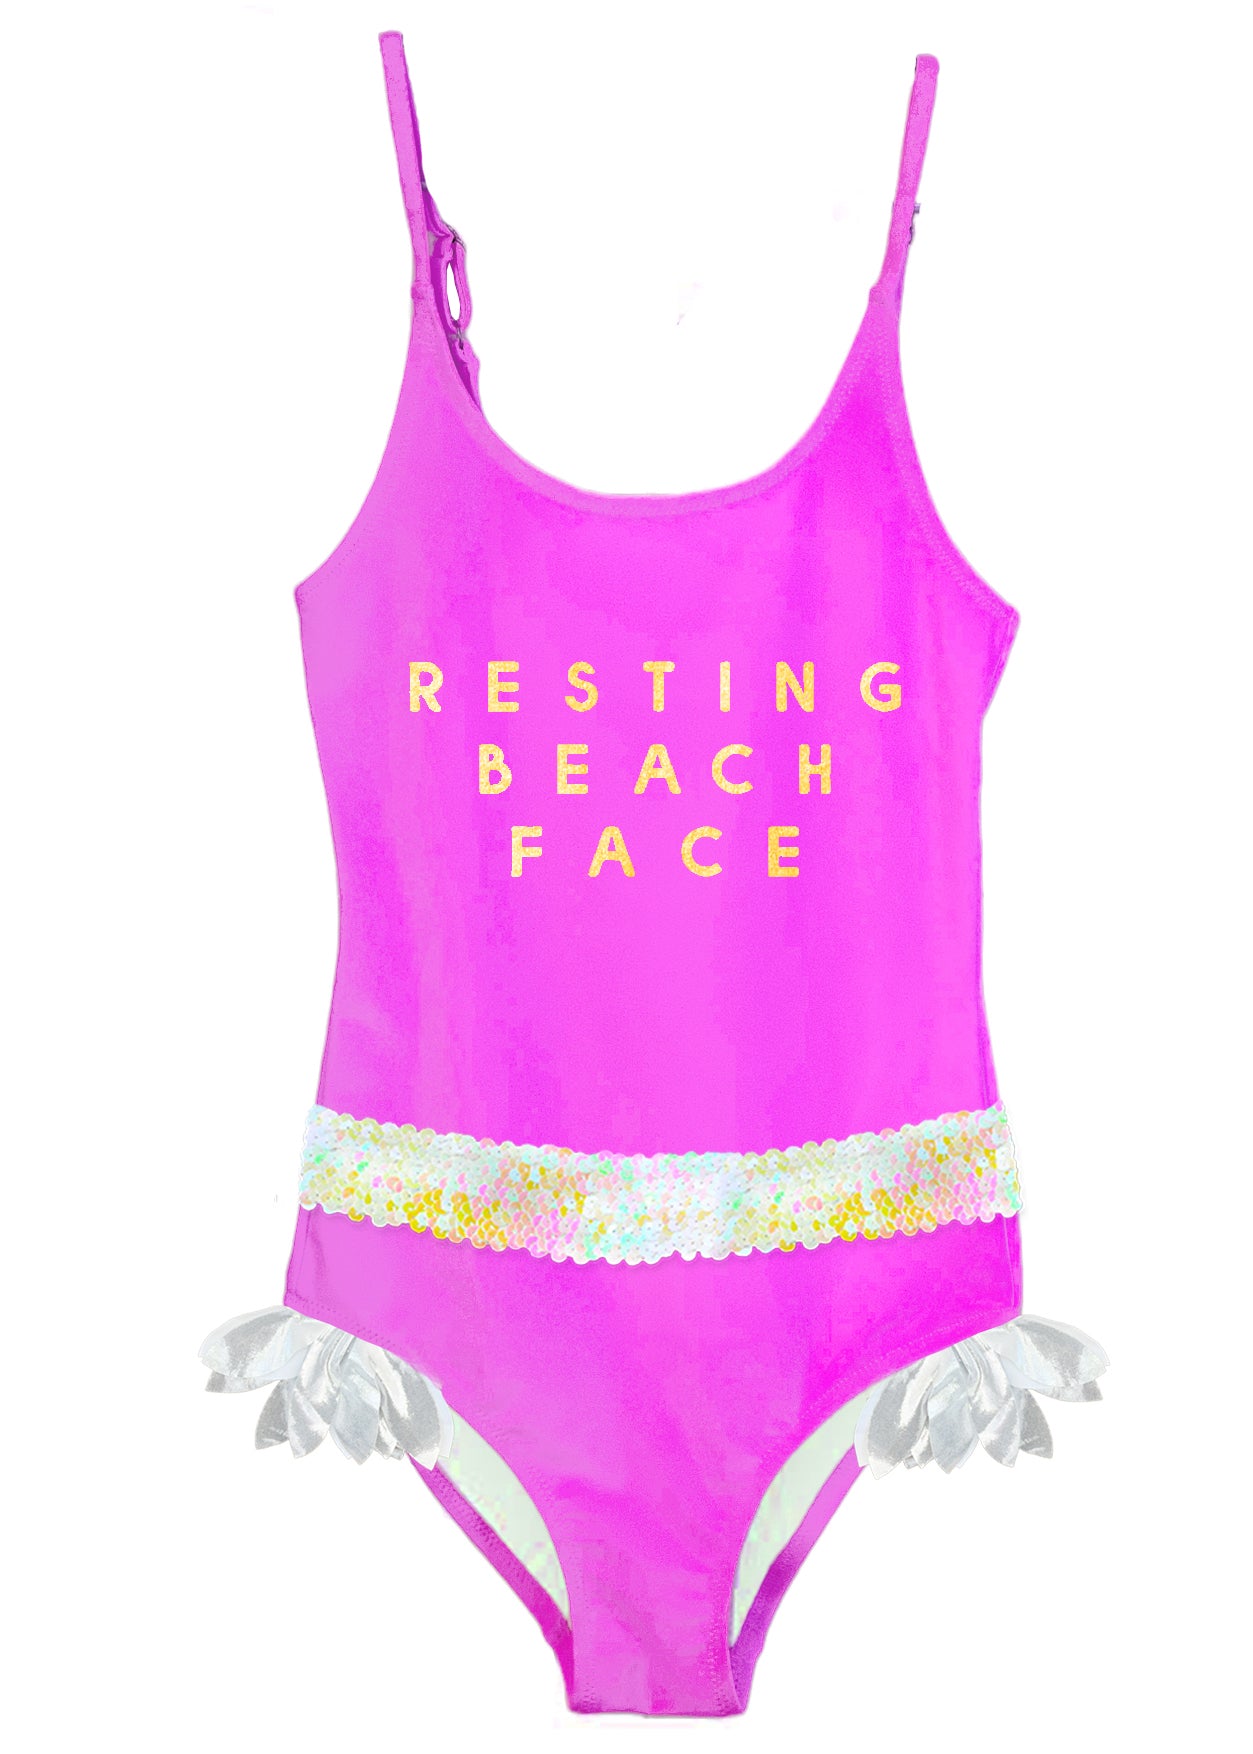 Resting Beach Face Neon Pink Swimsuit  with Sequin Belt & Silver Petals